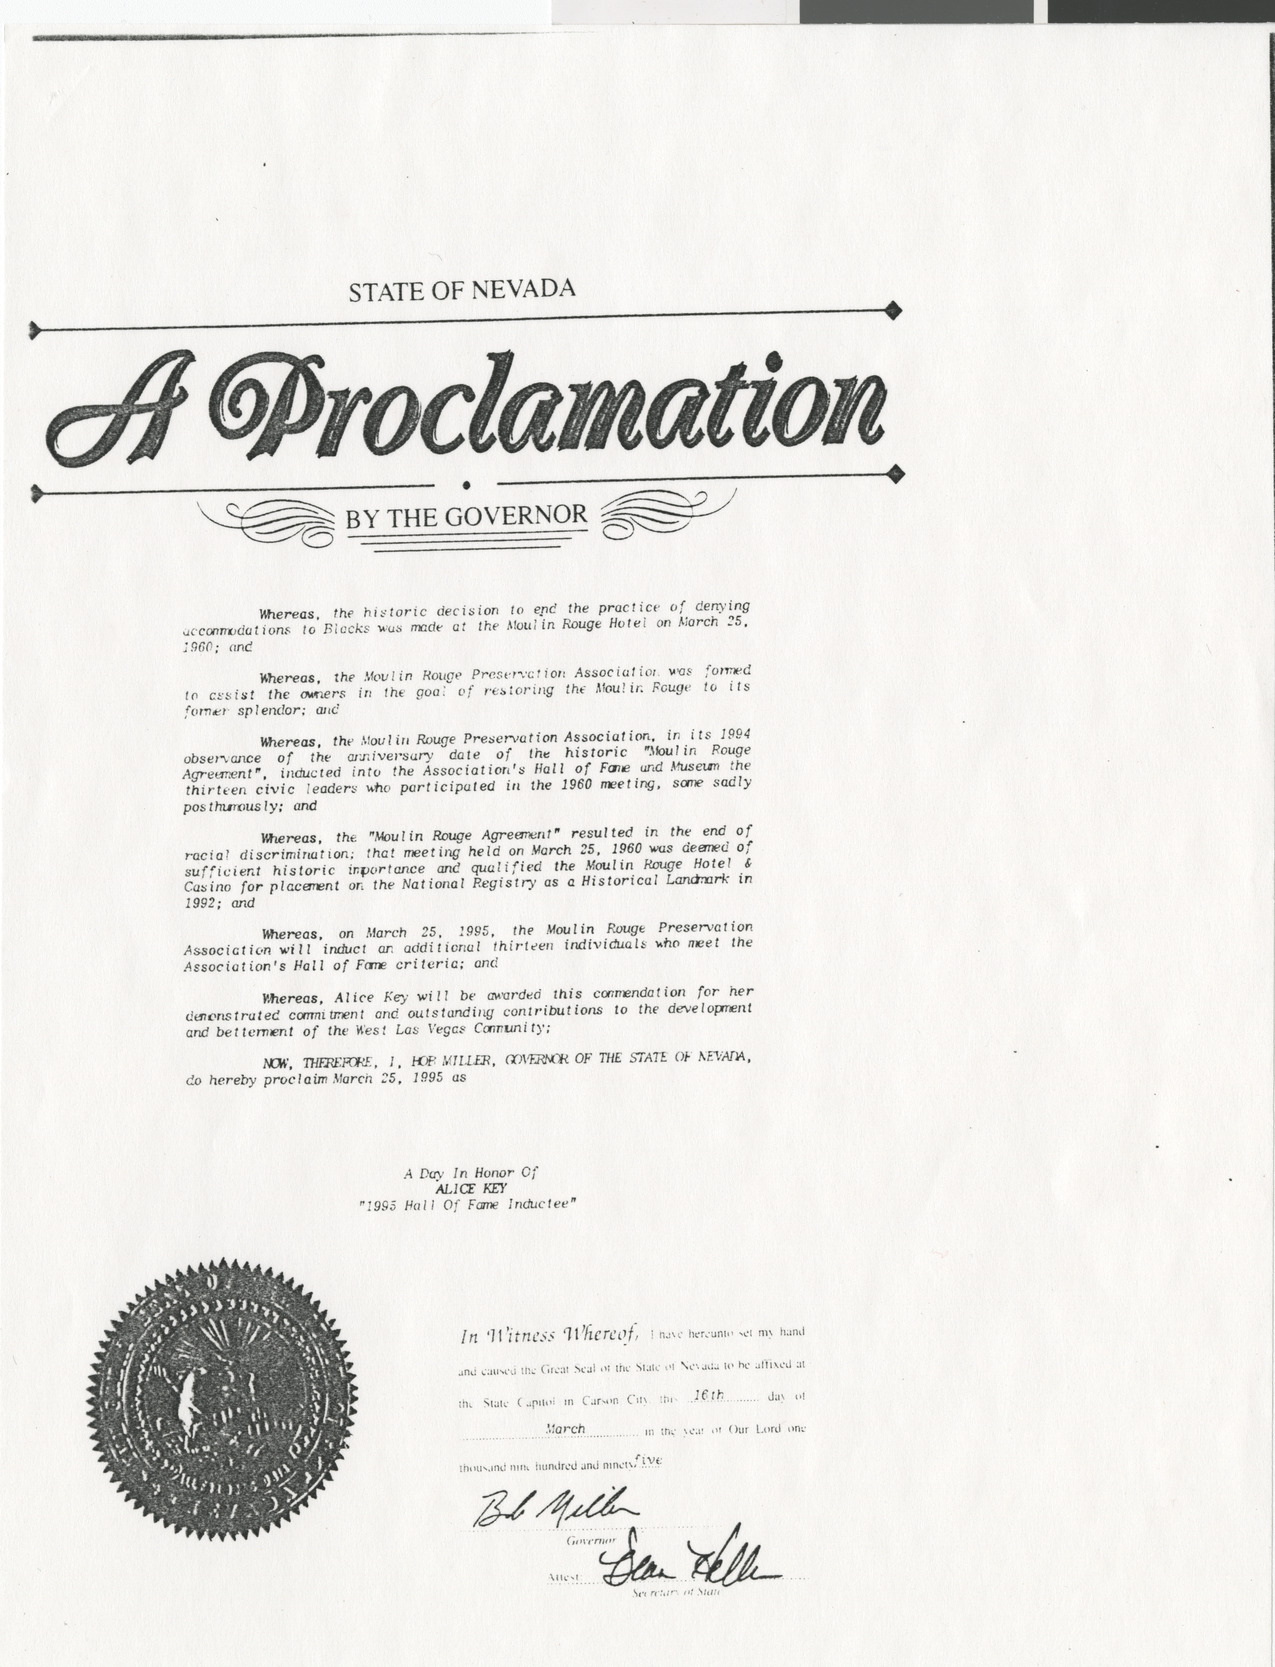 Photocopy of Proclamation by the Governor of Nevada for Alice Key Day, 1995 (see also Box 1 Folder 13)